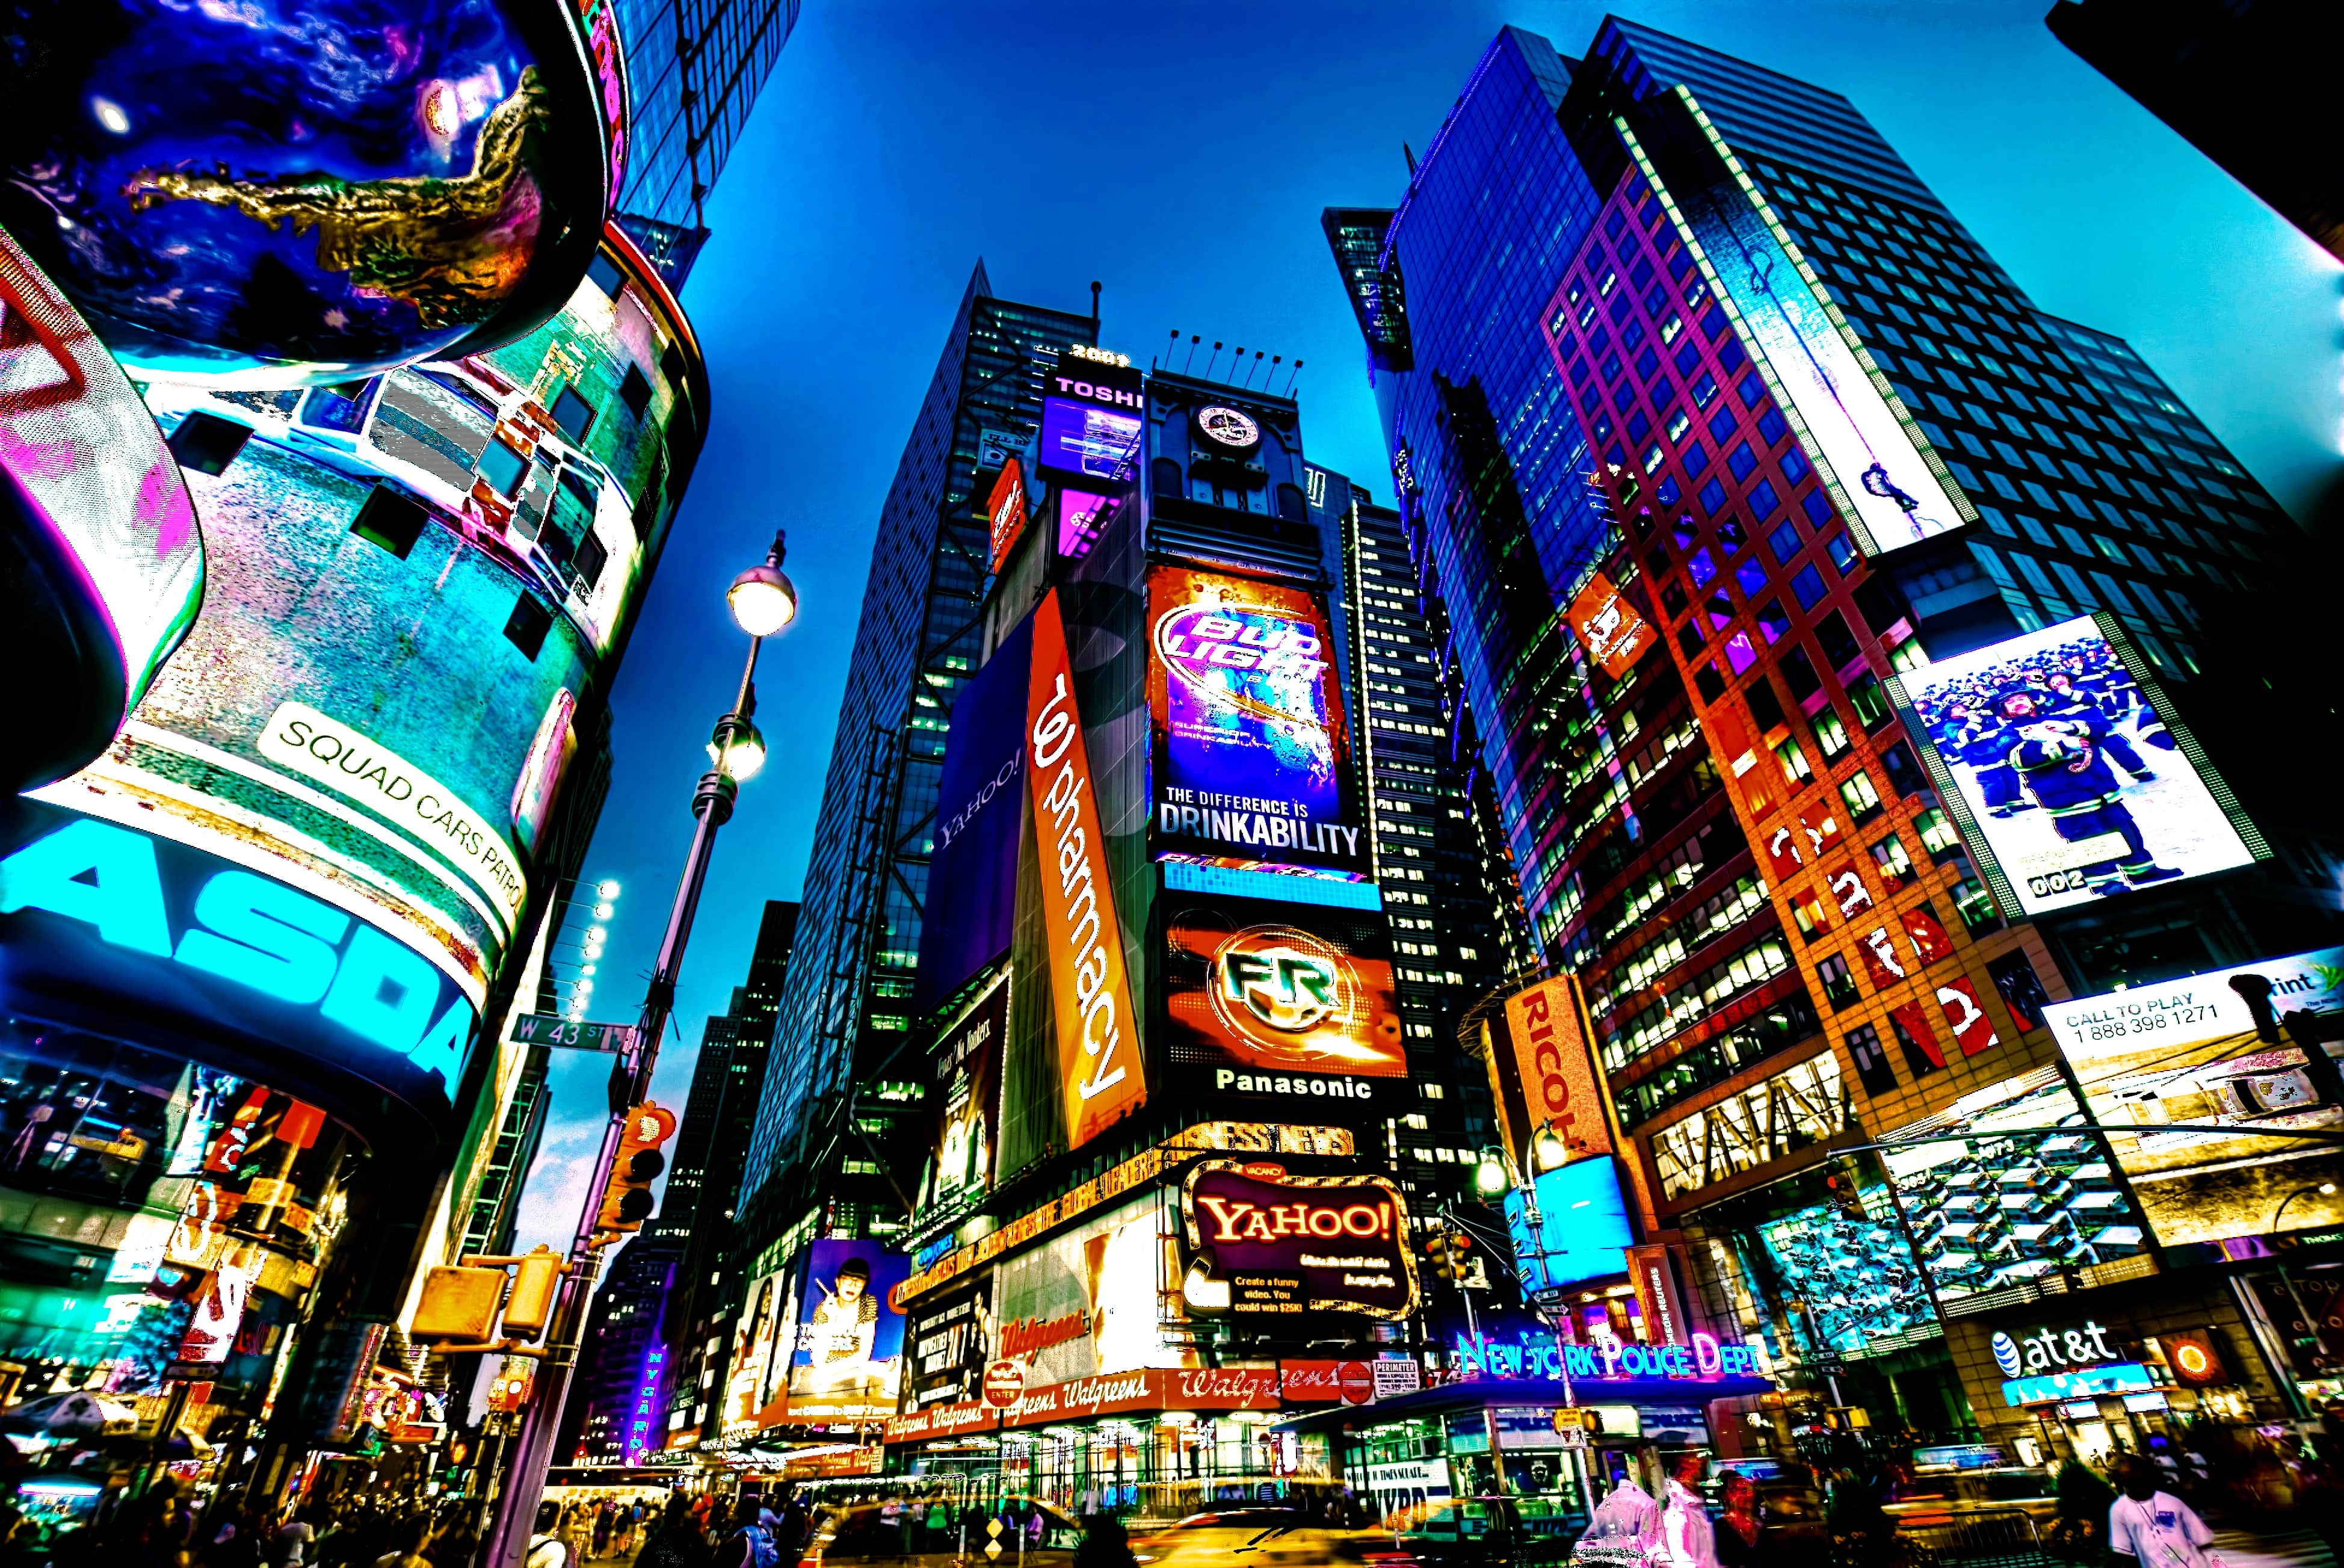 The growing digital signage industry and its effects on advertising.